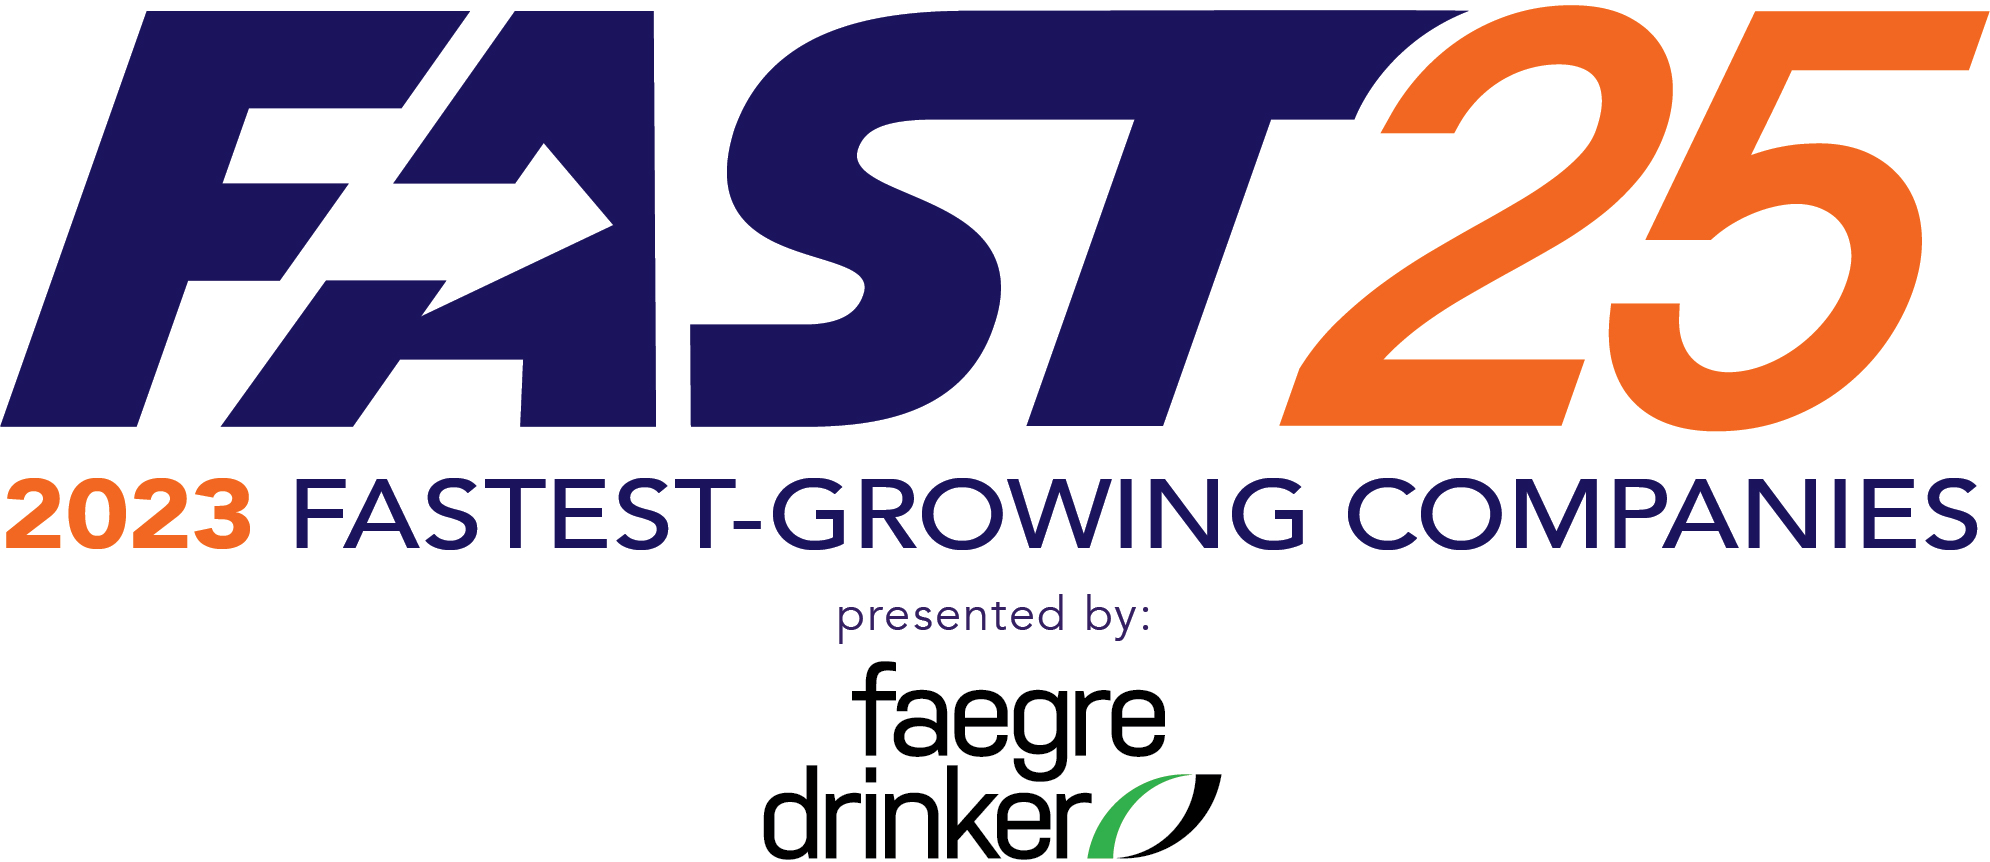 Fast 25 2023 Fastest-Growing Companies, Presented by: faegre drinker